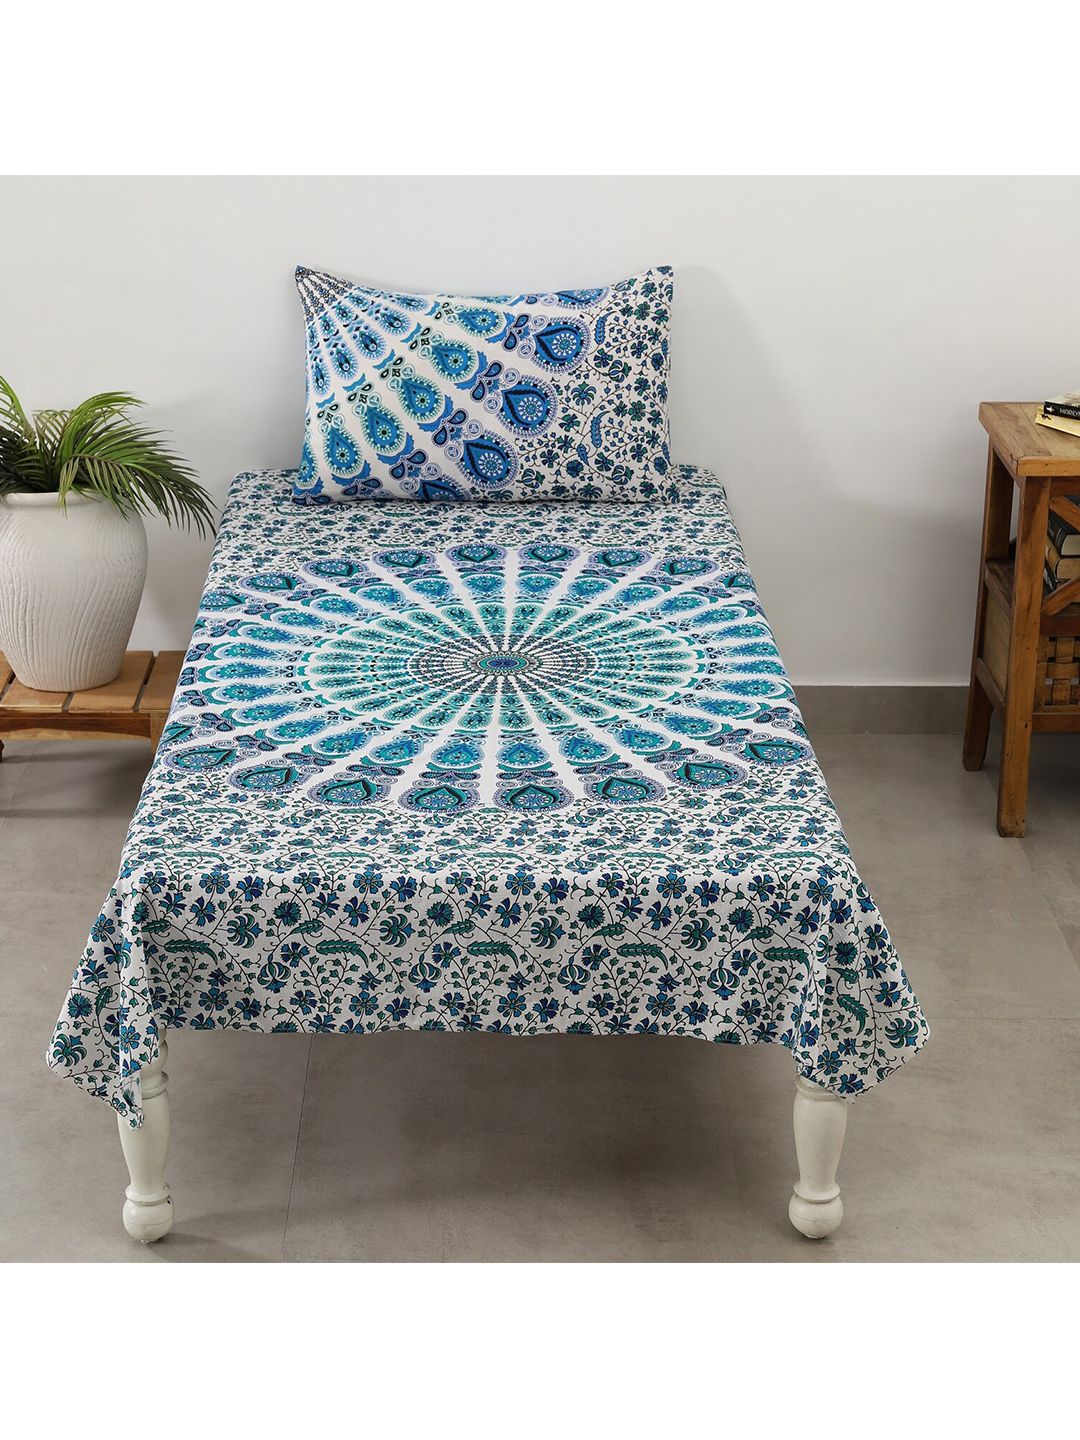 HANDICRAFT PALACE White & Blue Ethnic Motifs 144 TC Single Bedsheet with 1 Pillow Covers Price in India